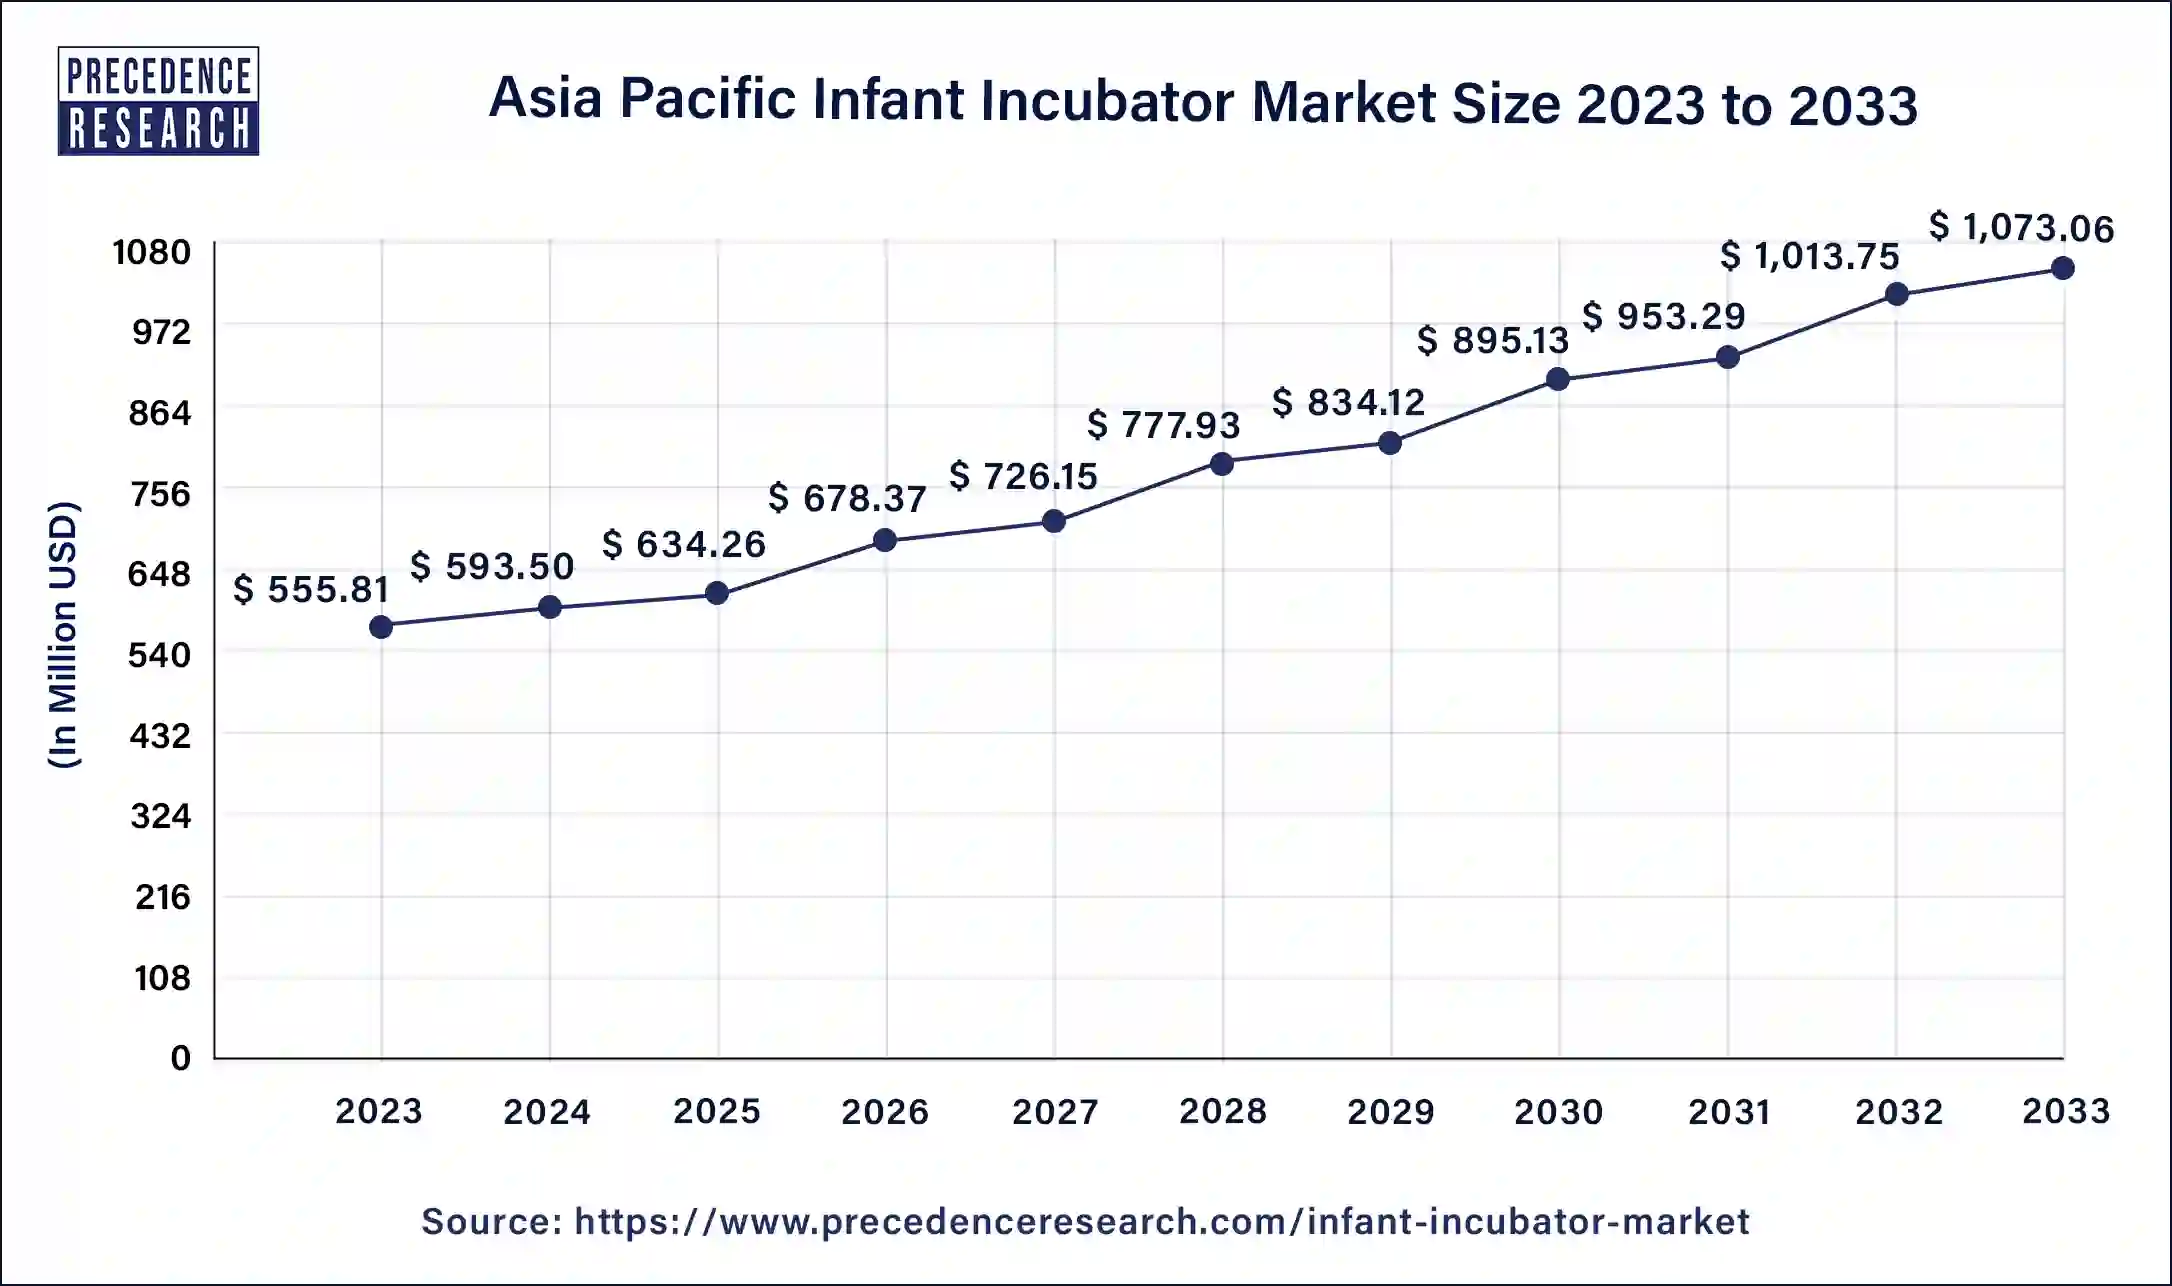 Asia Pacific Infant Incubator Market Size 2024 to 2033